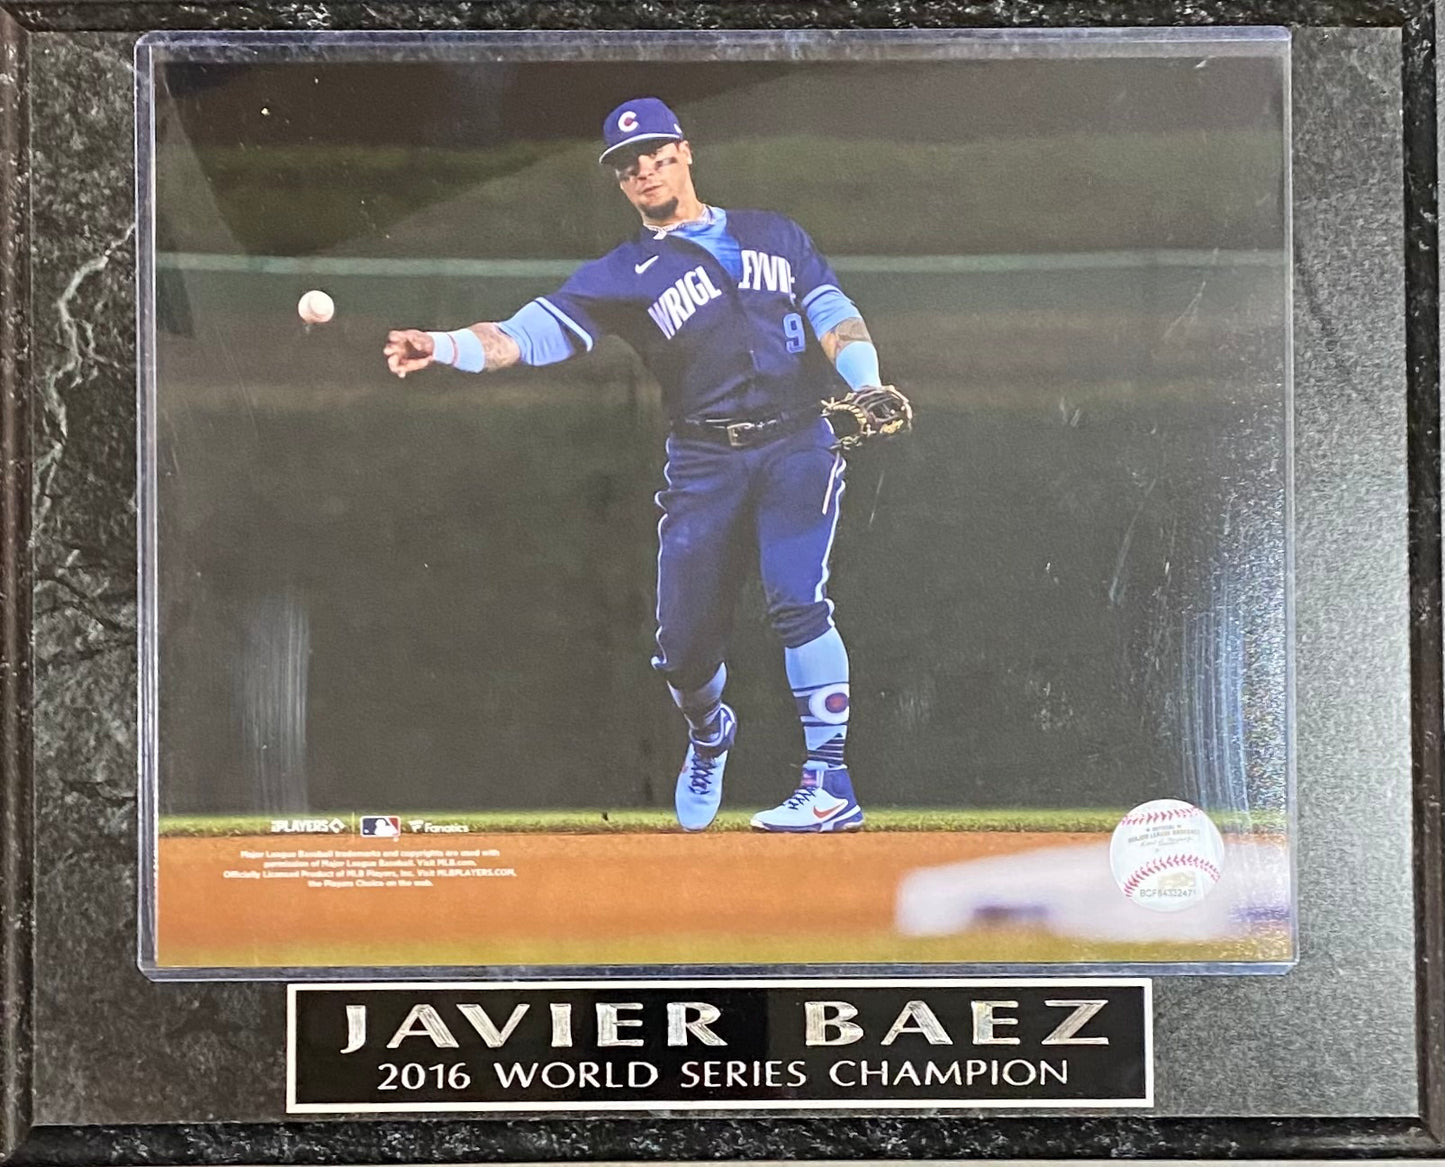 Javier Baez 2016 World Series Champion Chicago Cubs Wall Plaque